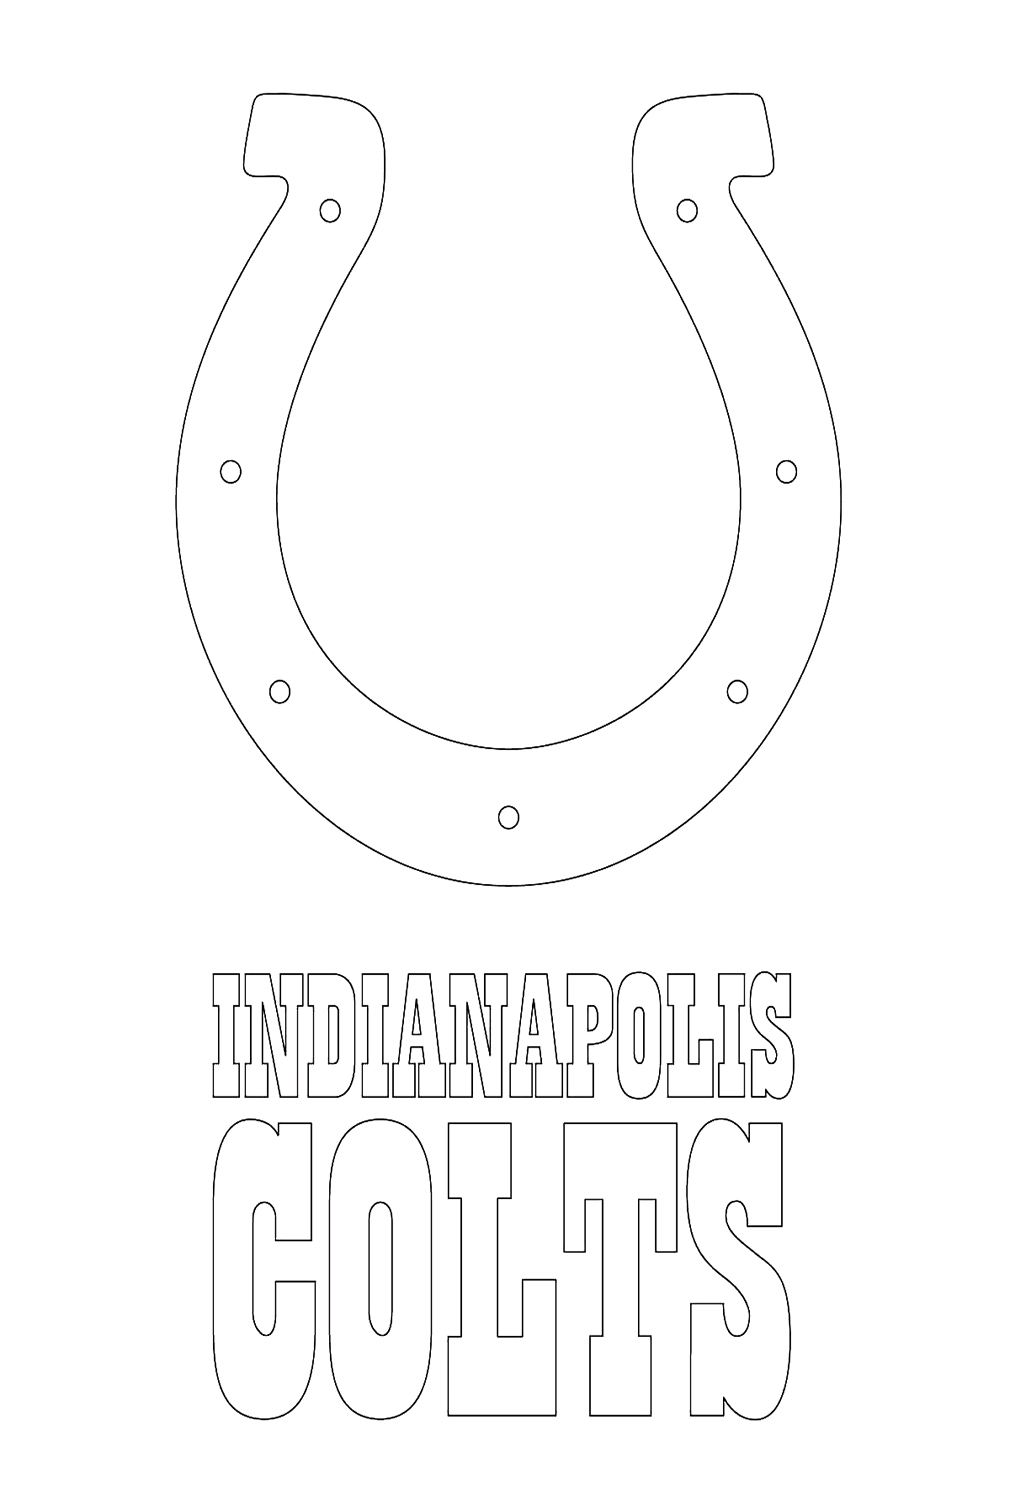 Indianapolis Colts Logo Coloring Page